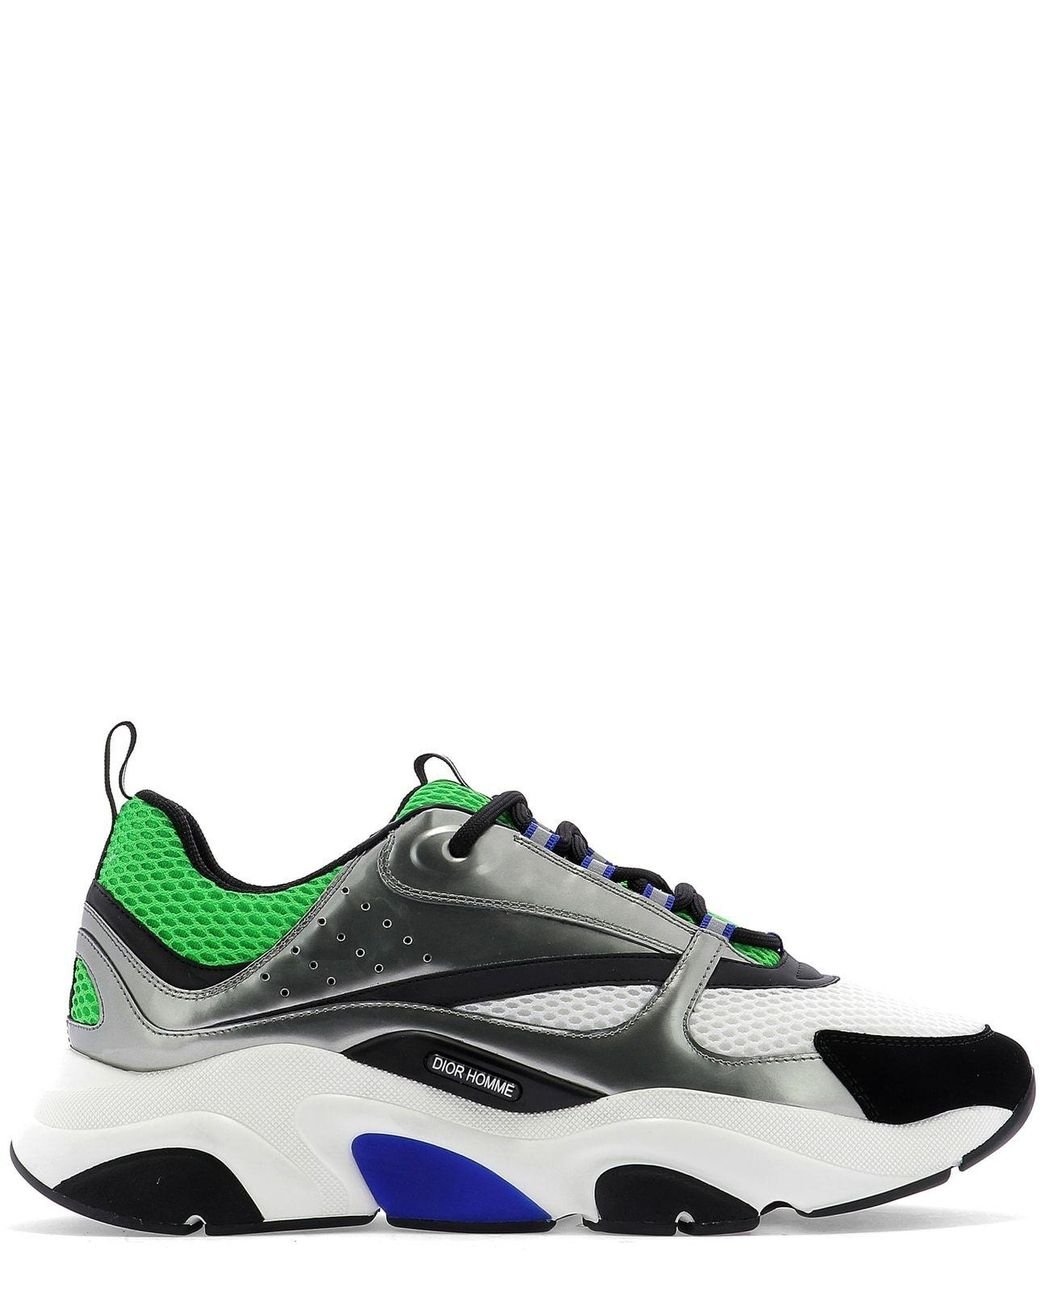 Dior Homme B22 Sneakers in Green for Men